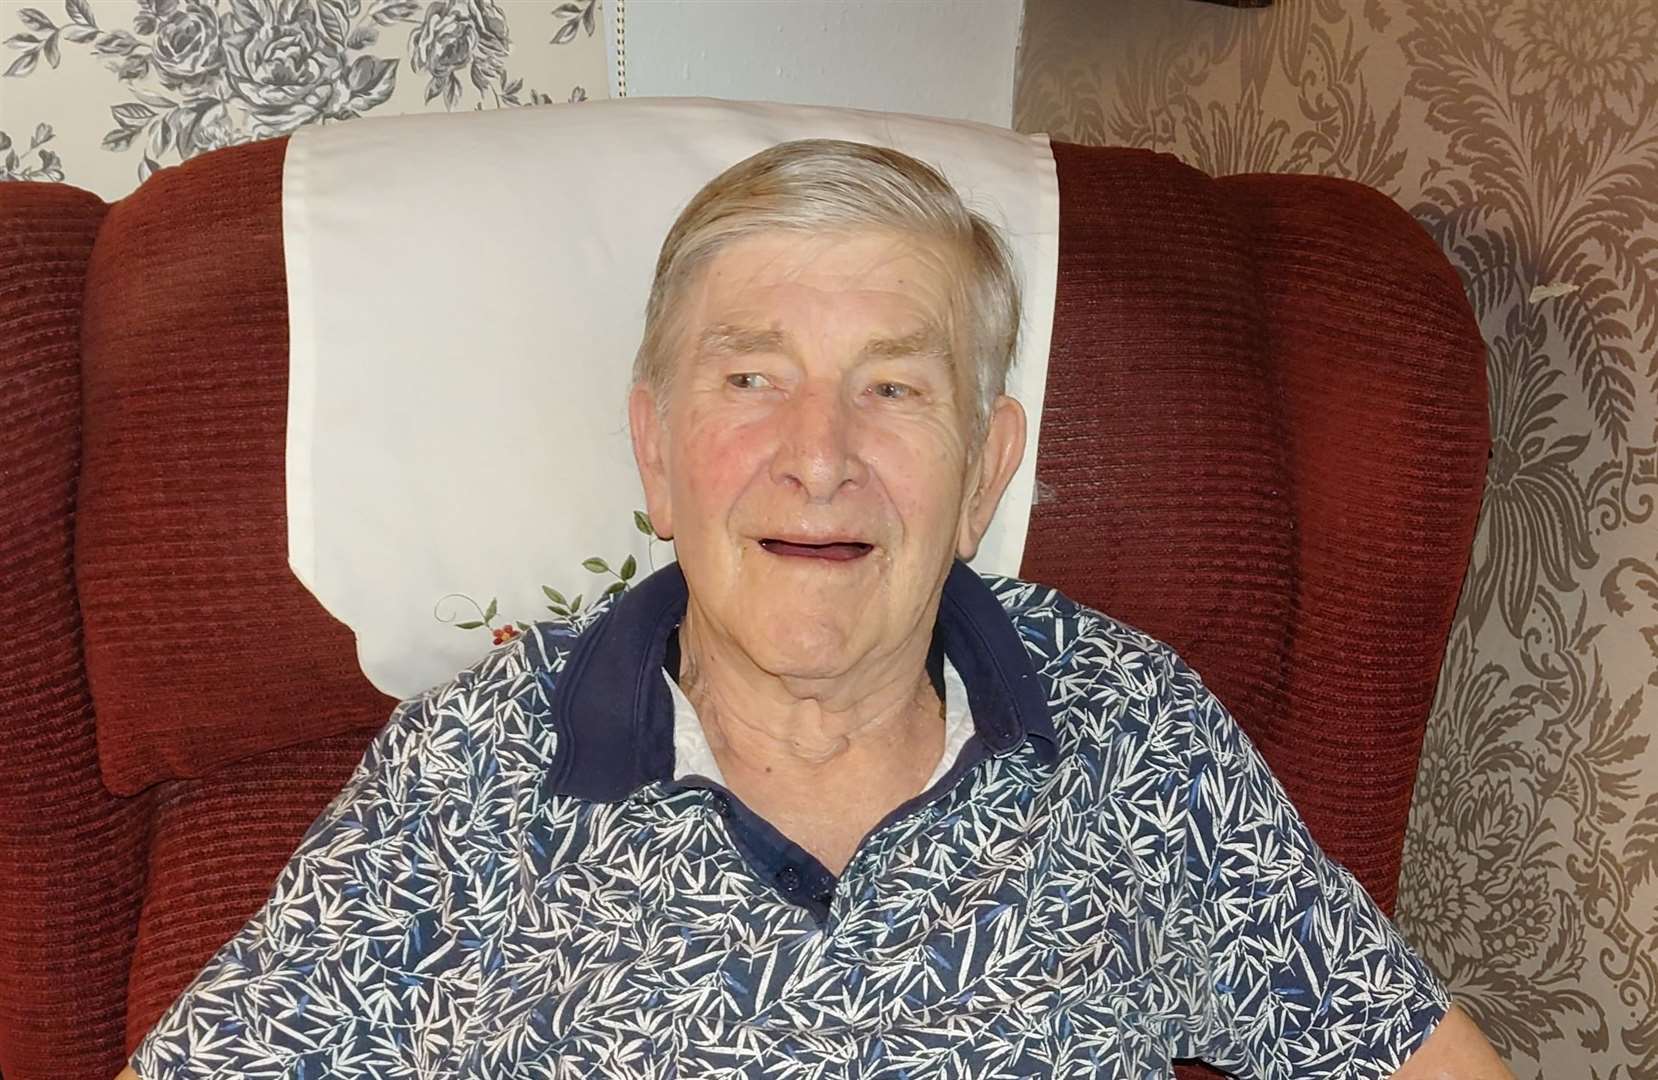 Brian Hooker, 86, fell after leaving the A&E department at Medway Maritime Hospital in Gillingham. Picture: Lawrence Hooker